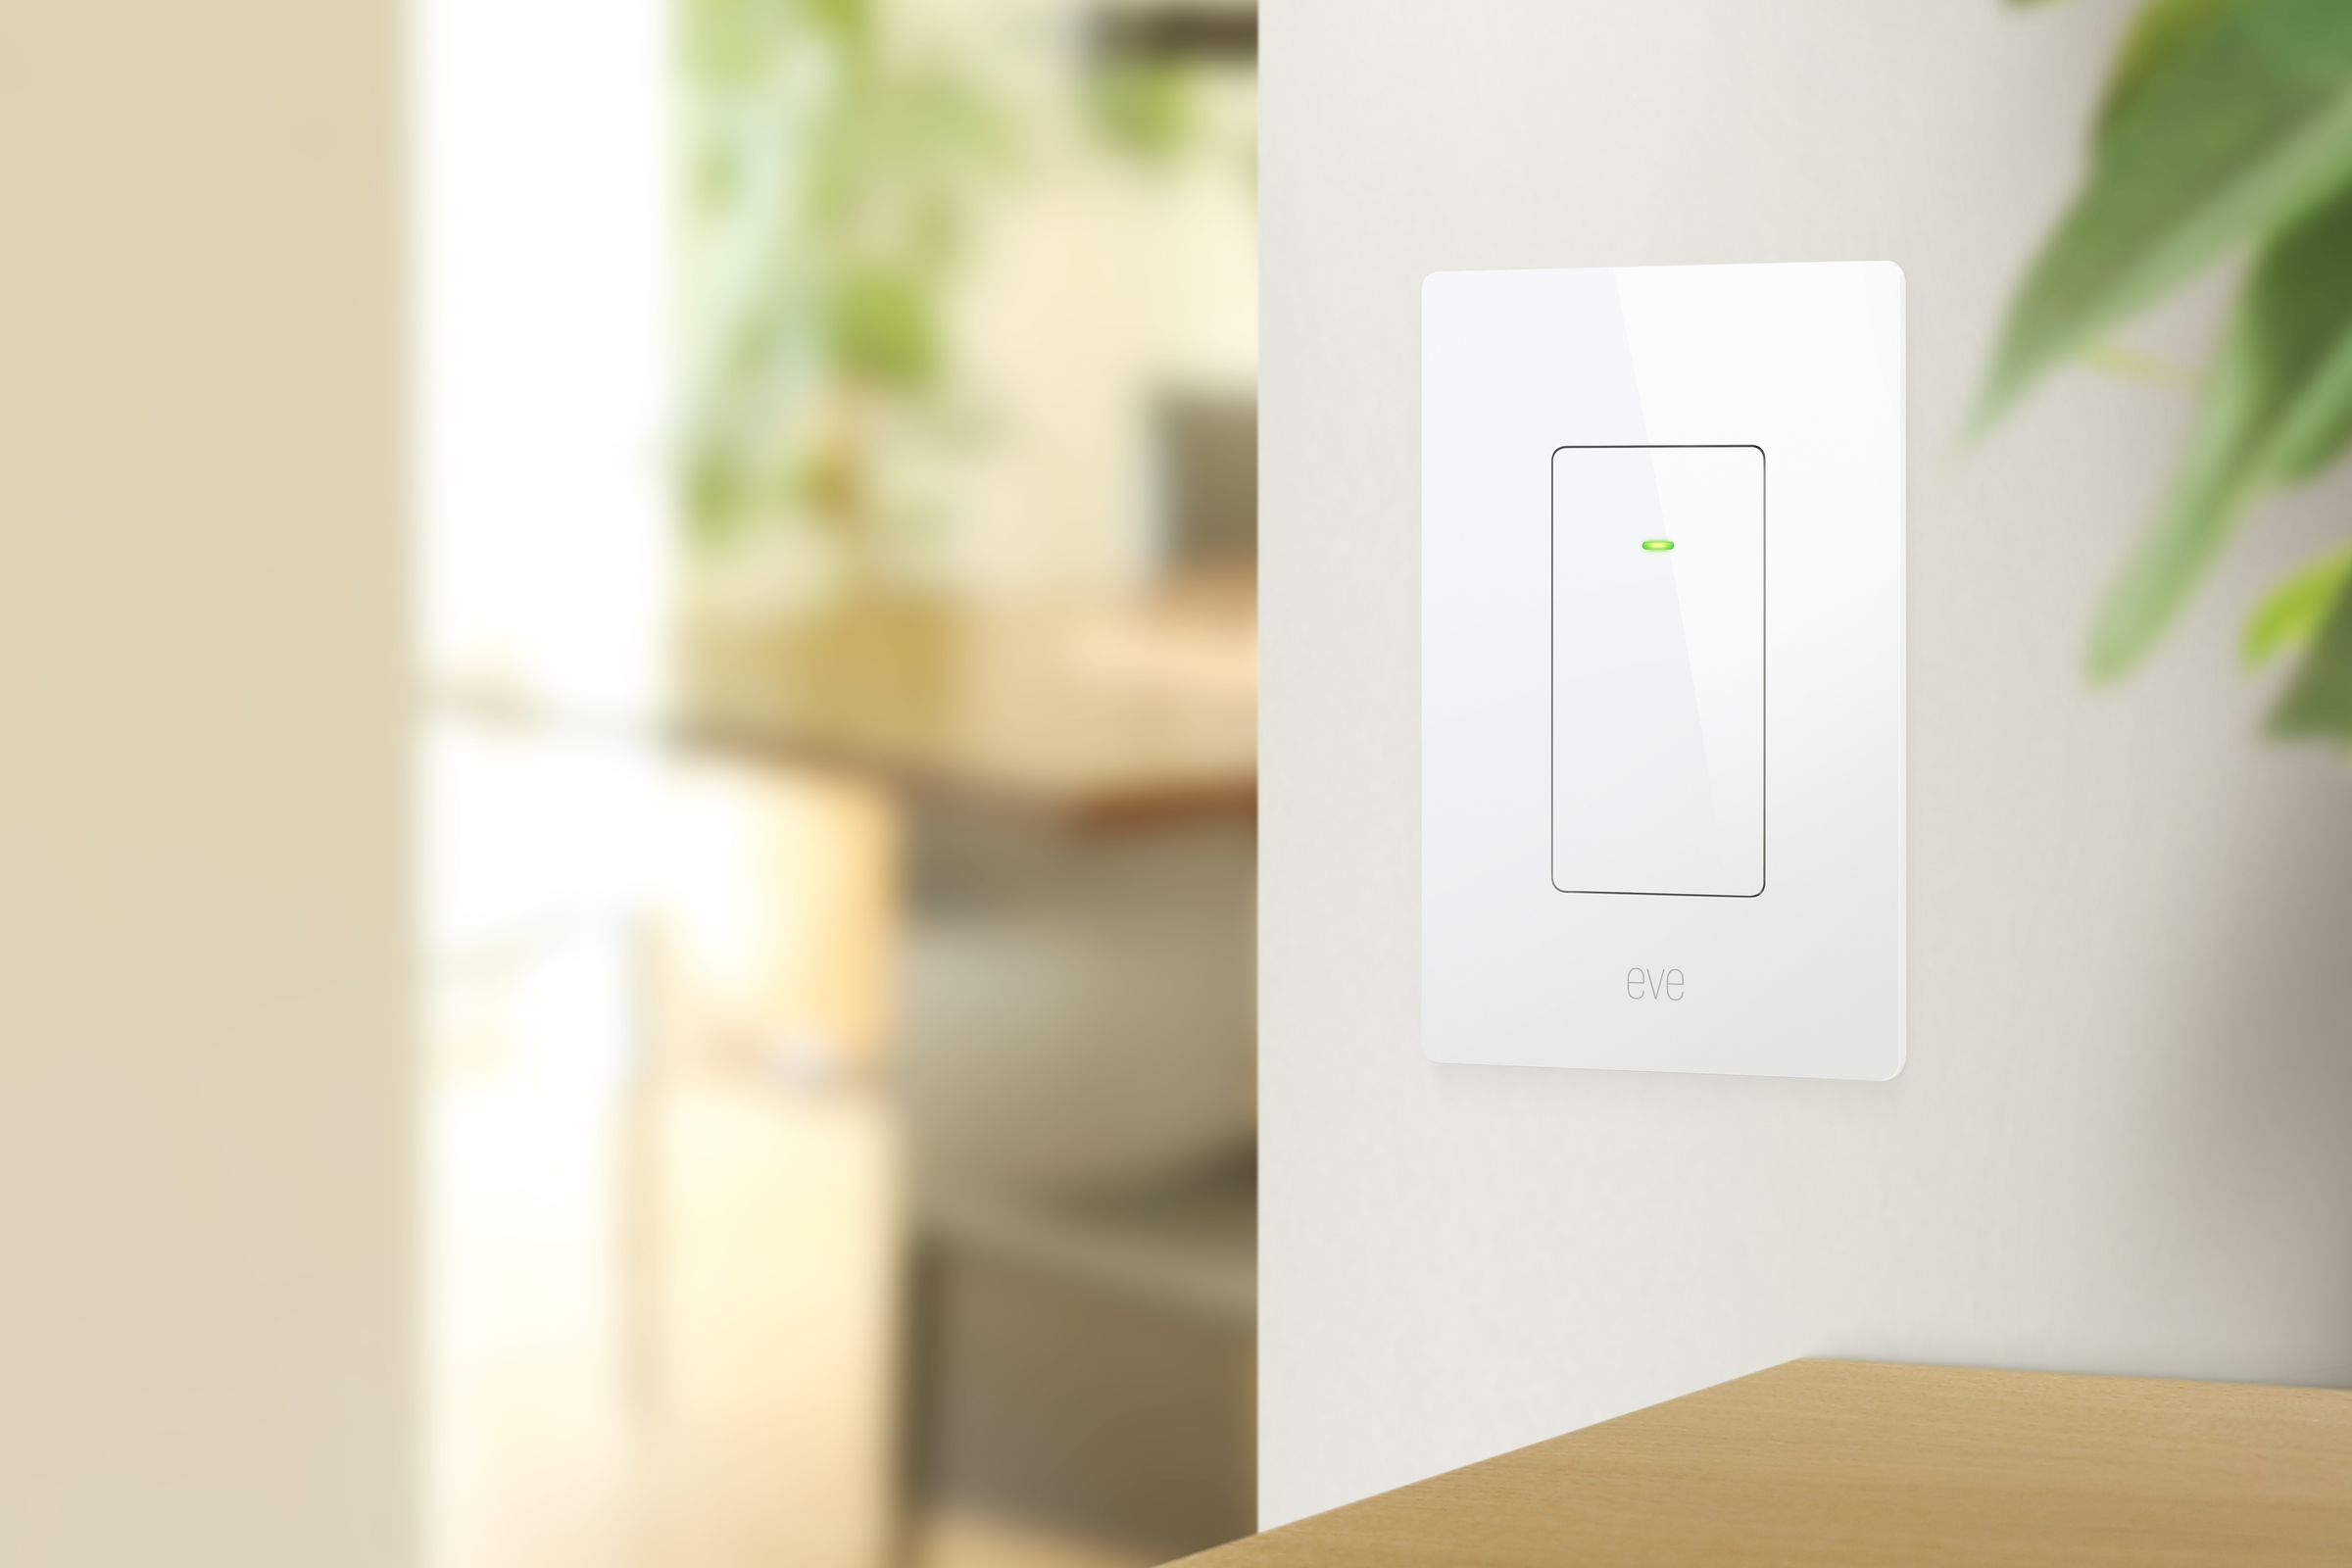 Eve’s latest light switch has Thread and will work with a new Eve Android app.